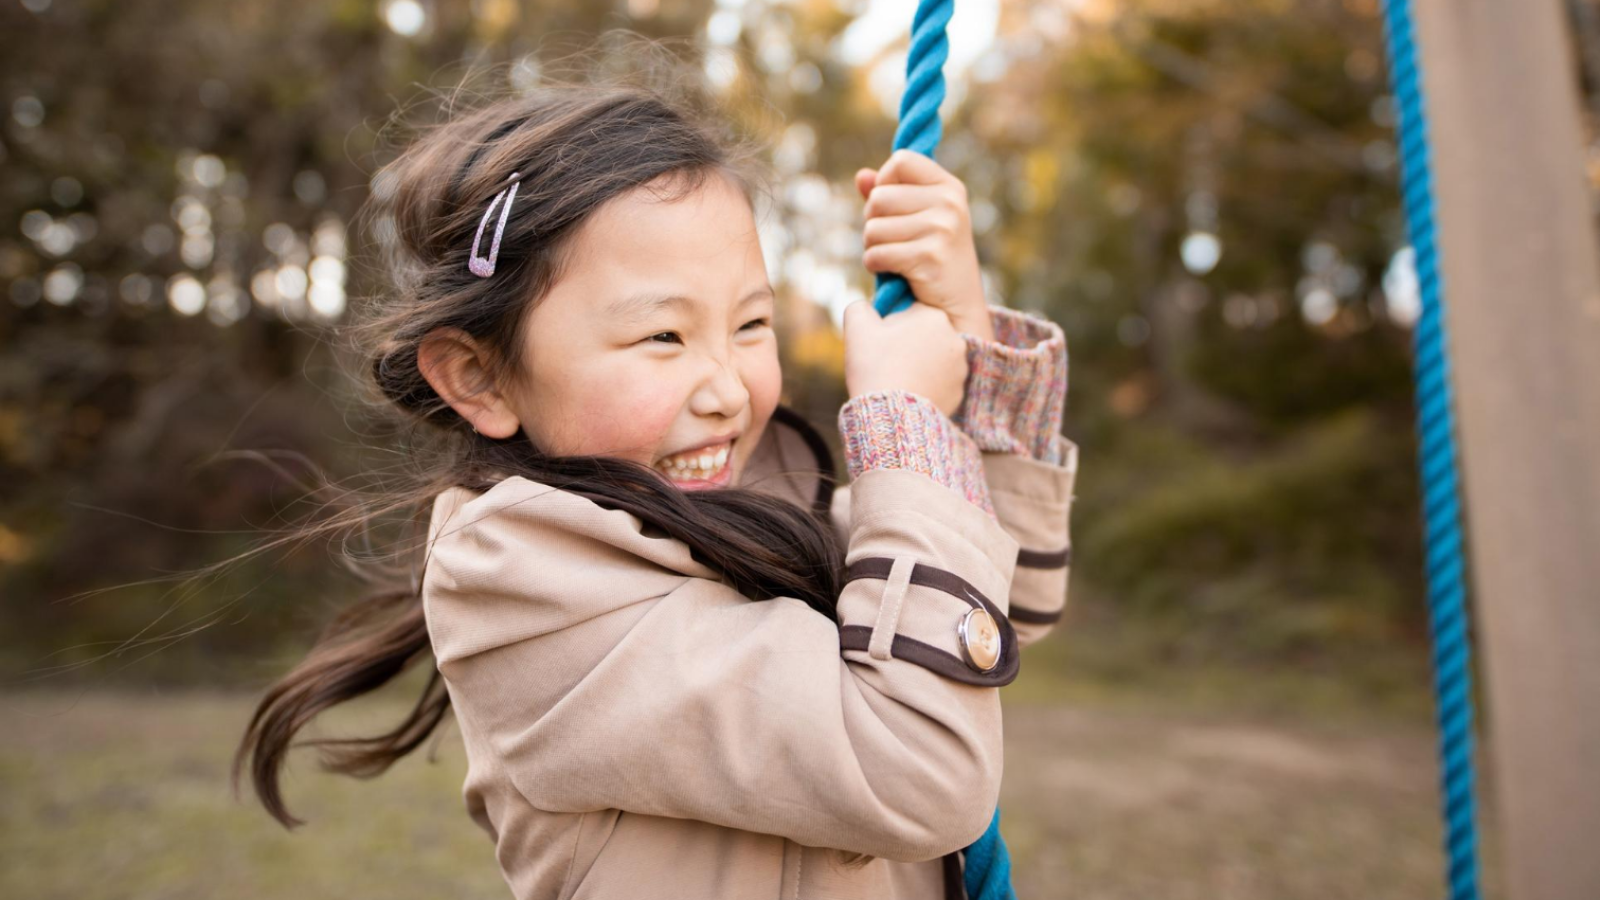 Smiling girl playing on a swing 